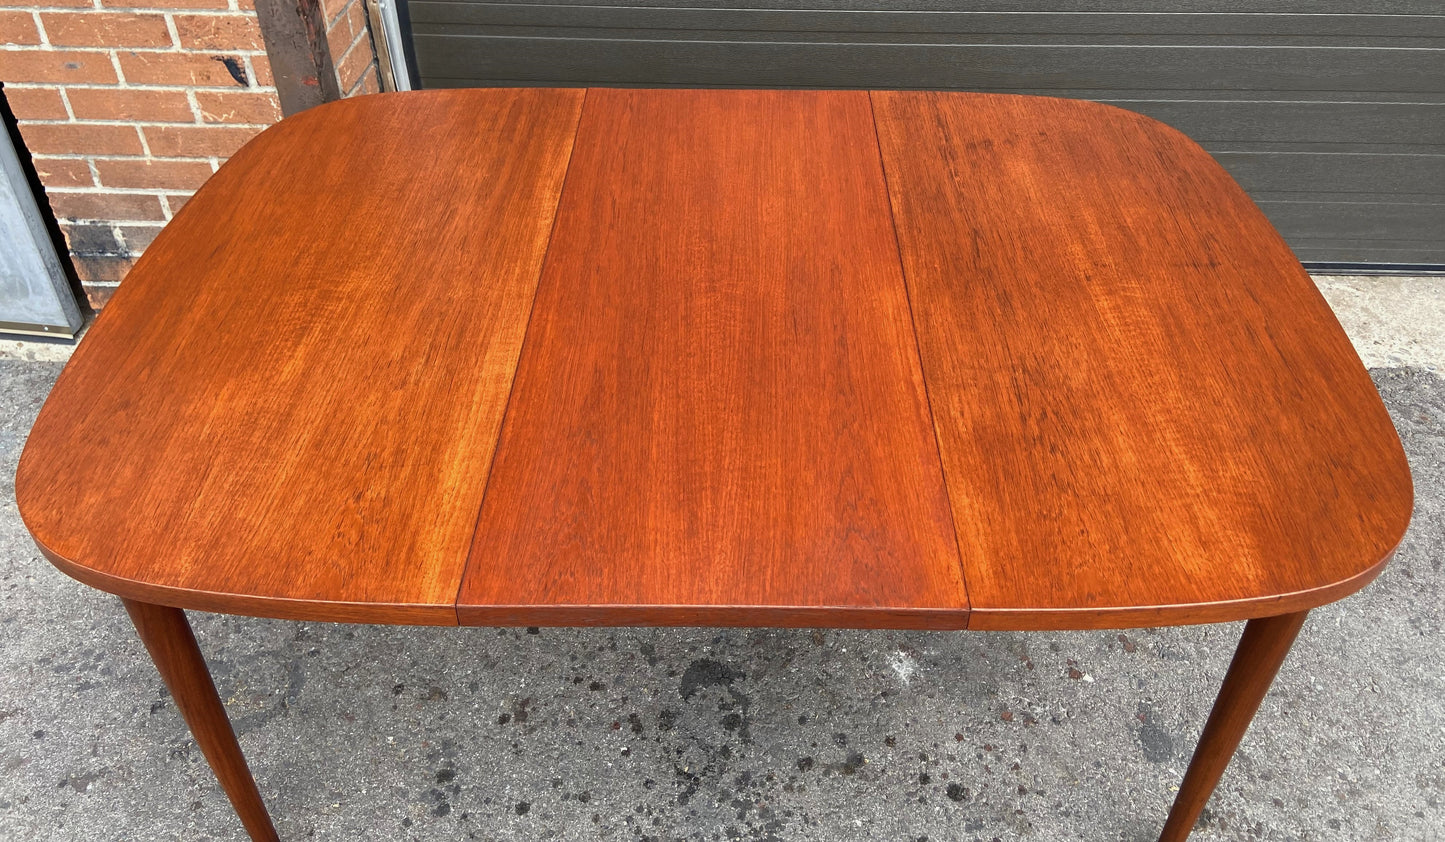 REFINISHED Mid Century Modern Teak Table Rounded w 1 Leaf